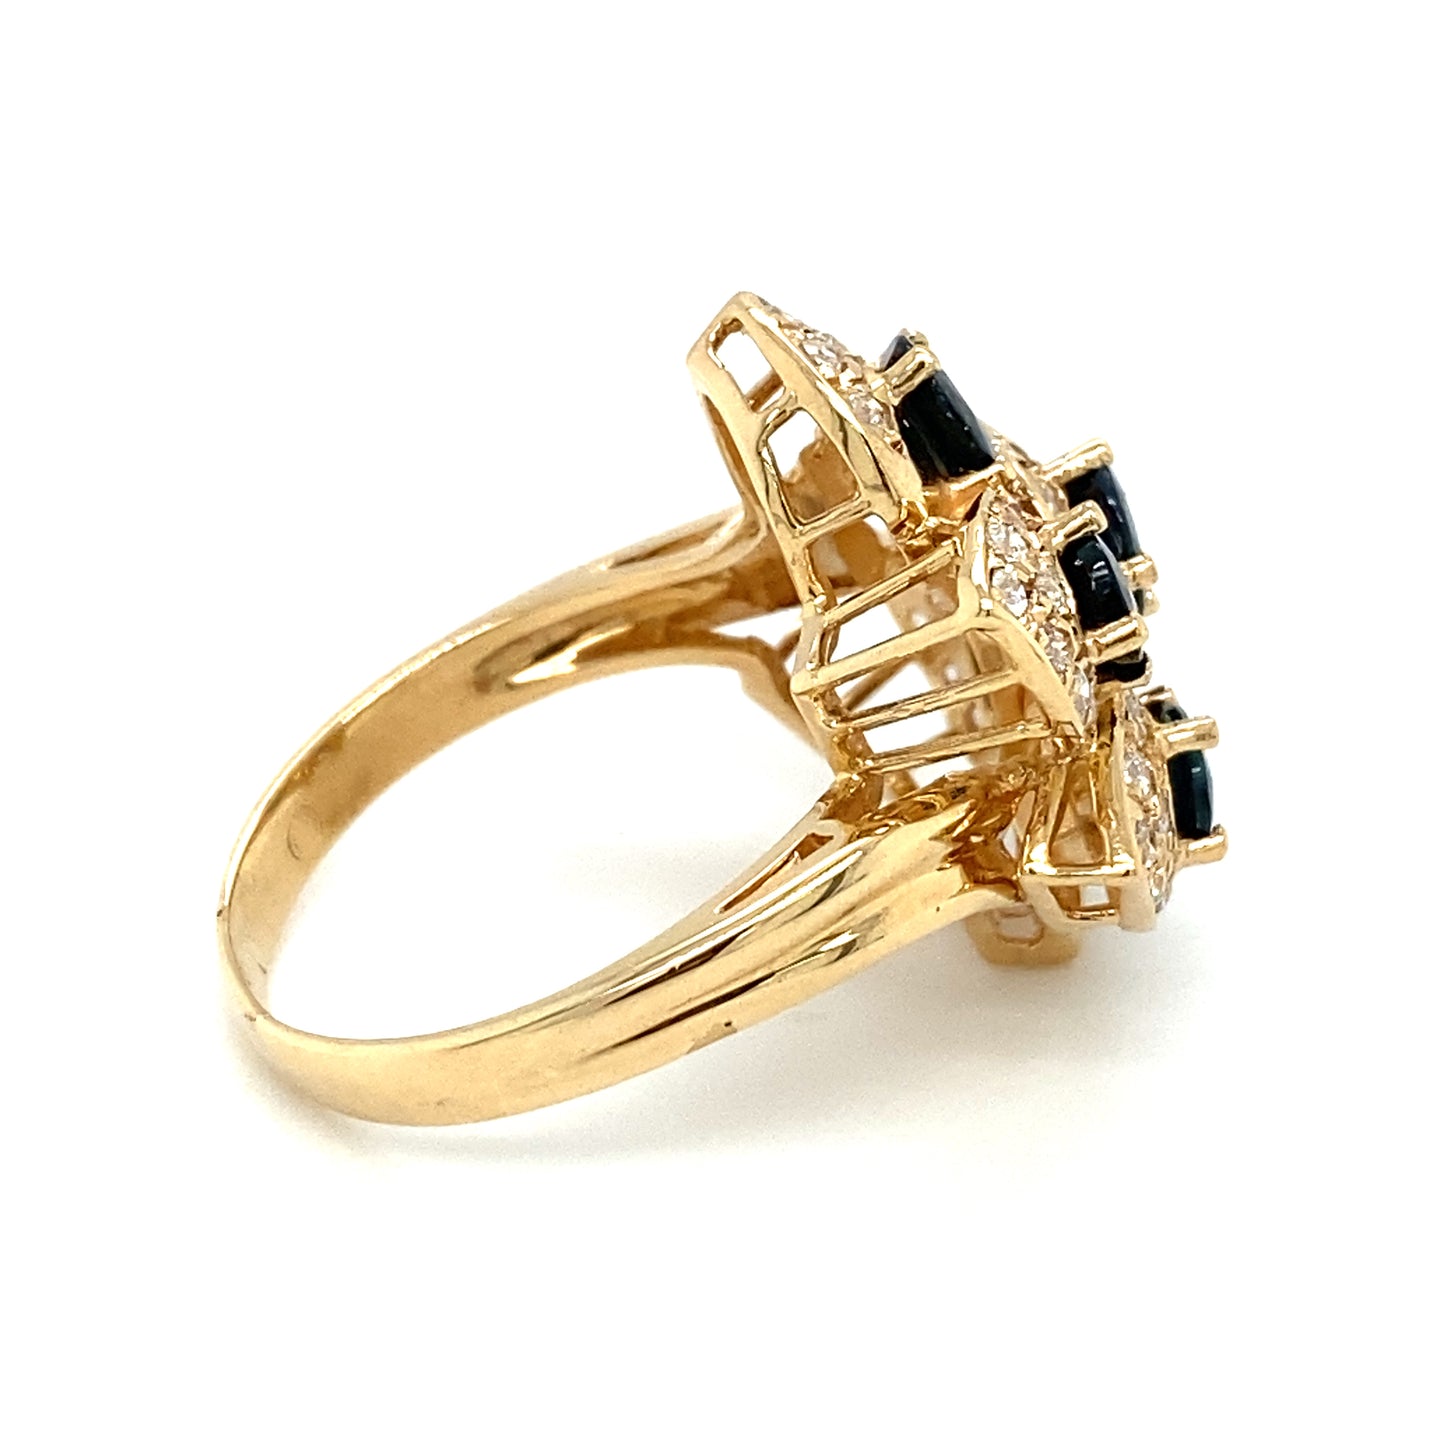 Circa 2000s Sapphire and Diamond Cocktail Ring in 14K Gold